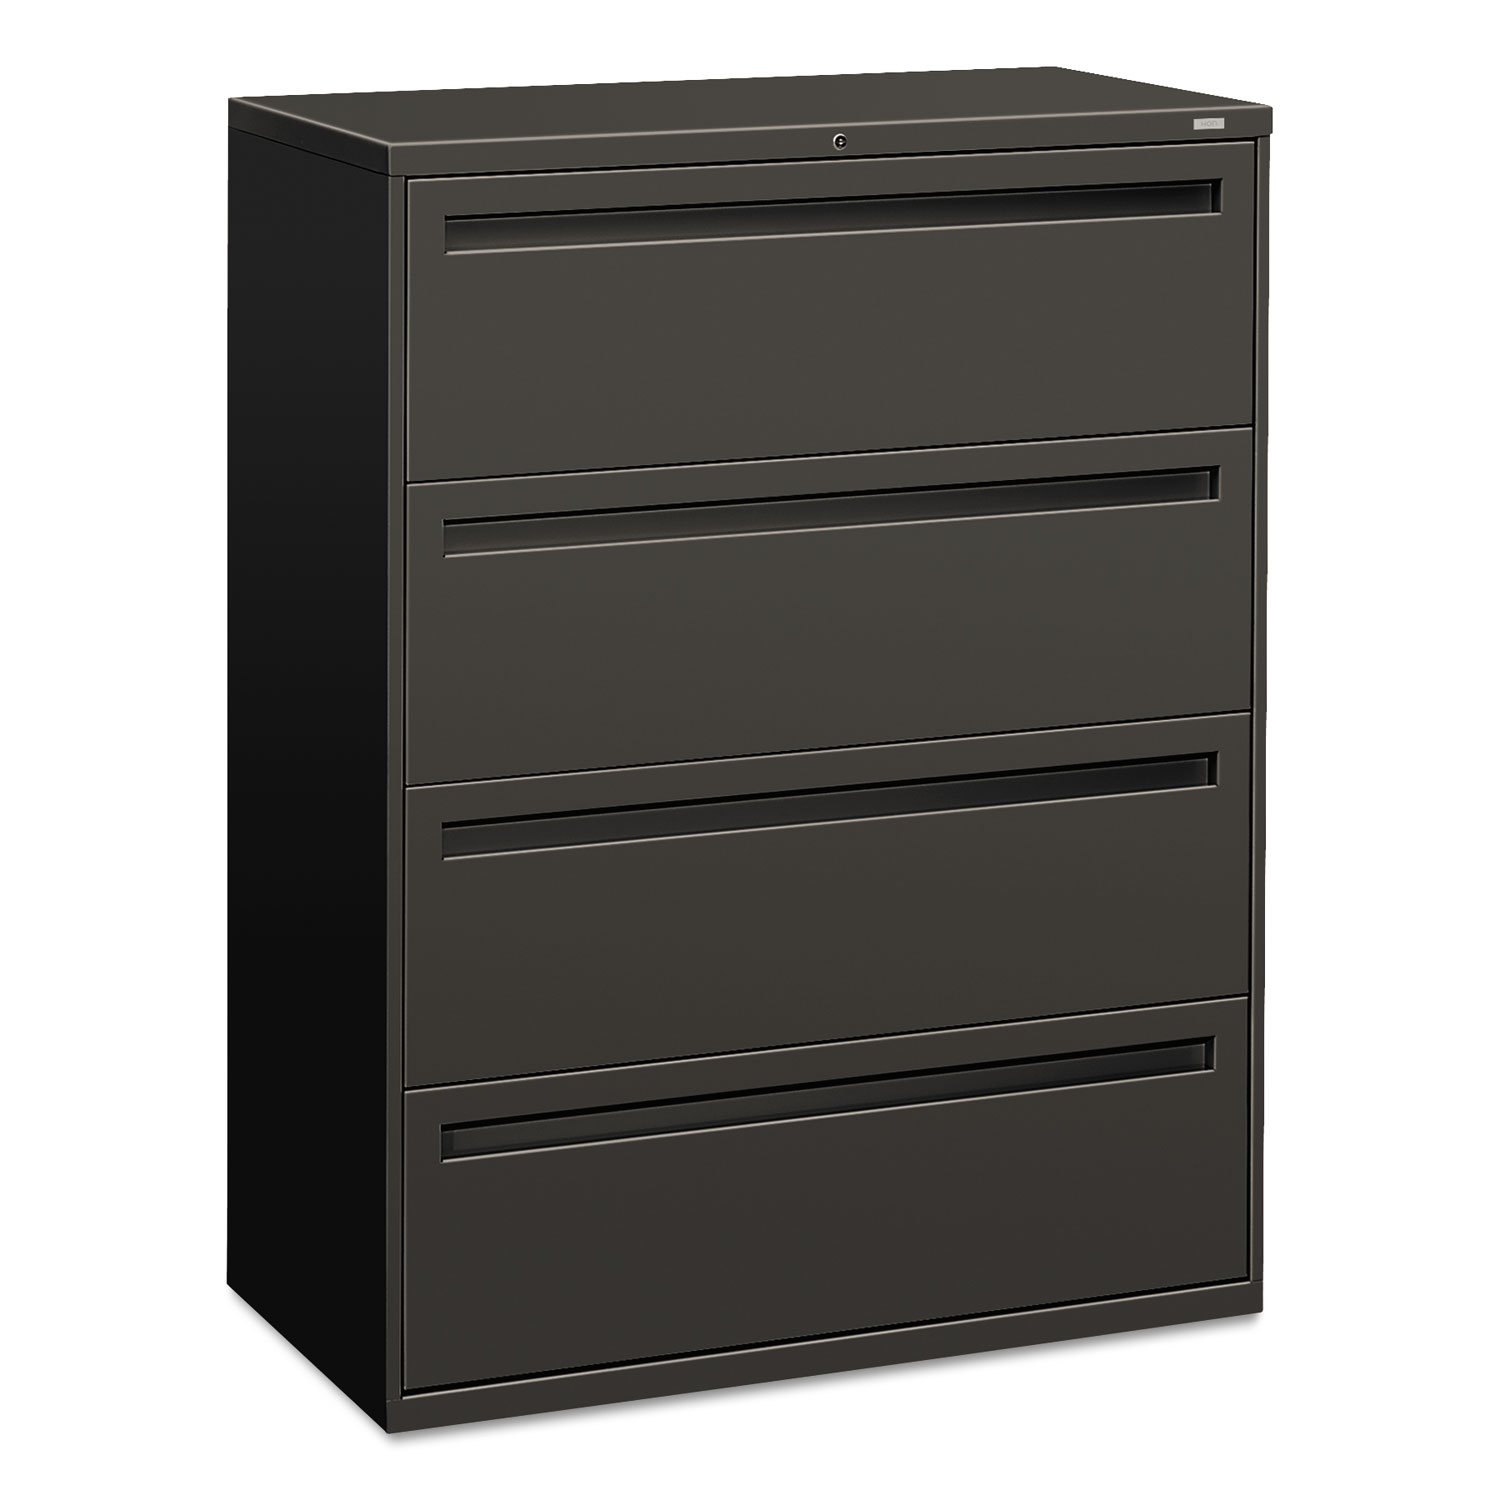 700 Series Four-Drawer Lateral File, 42w x 19-1/4d, Charcoal